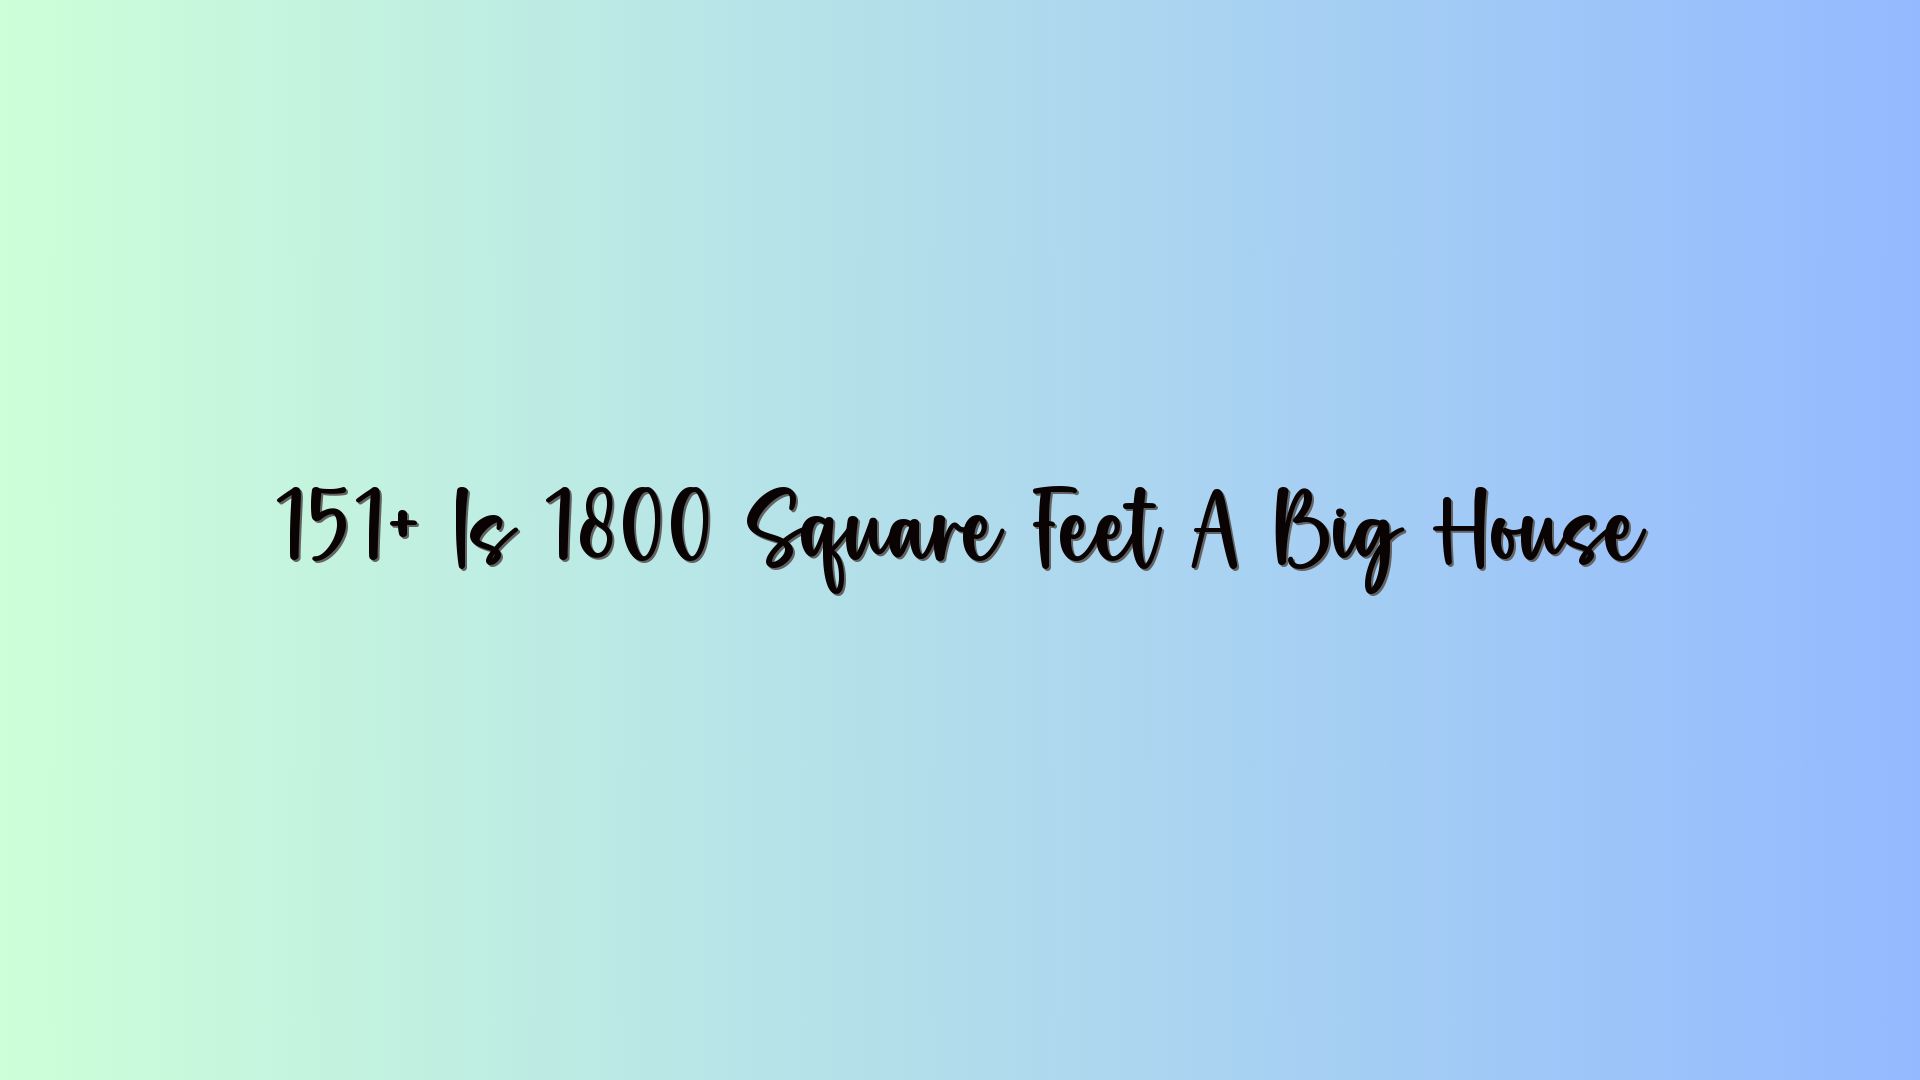 151+ Is 1800 Square Feet A Big House